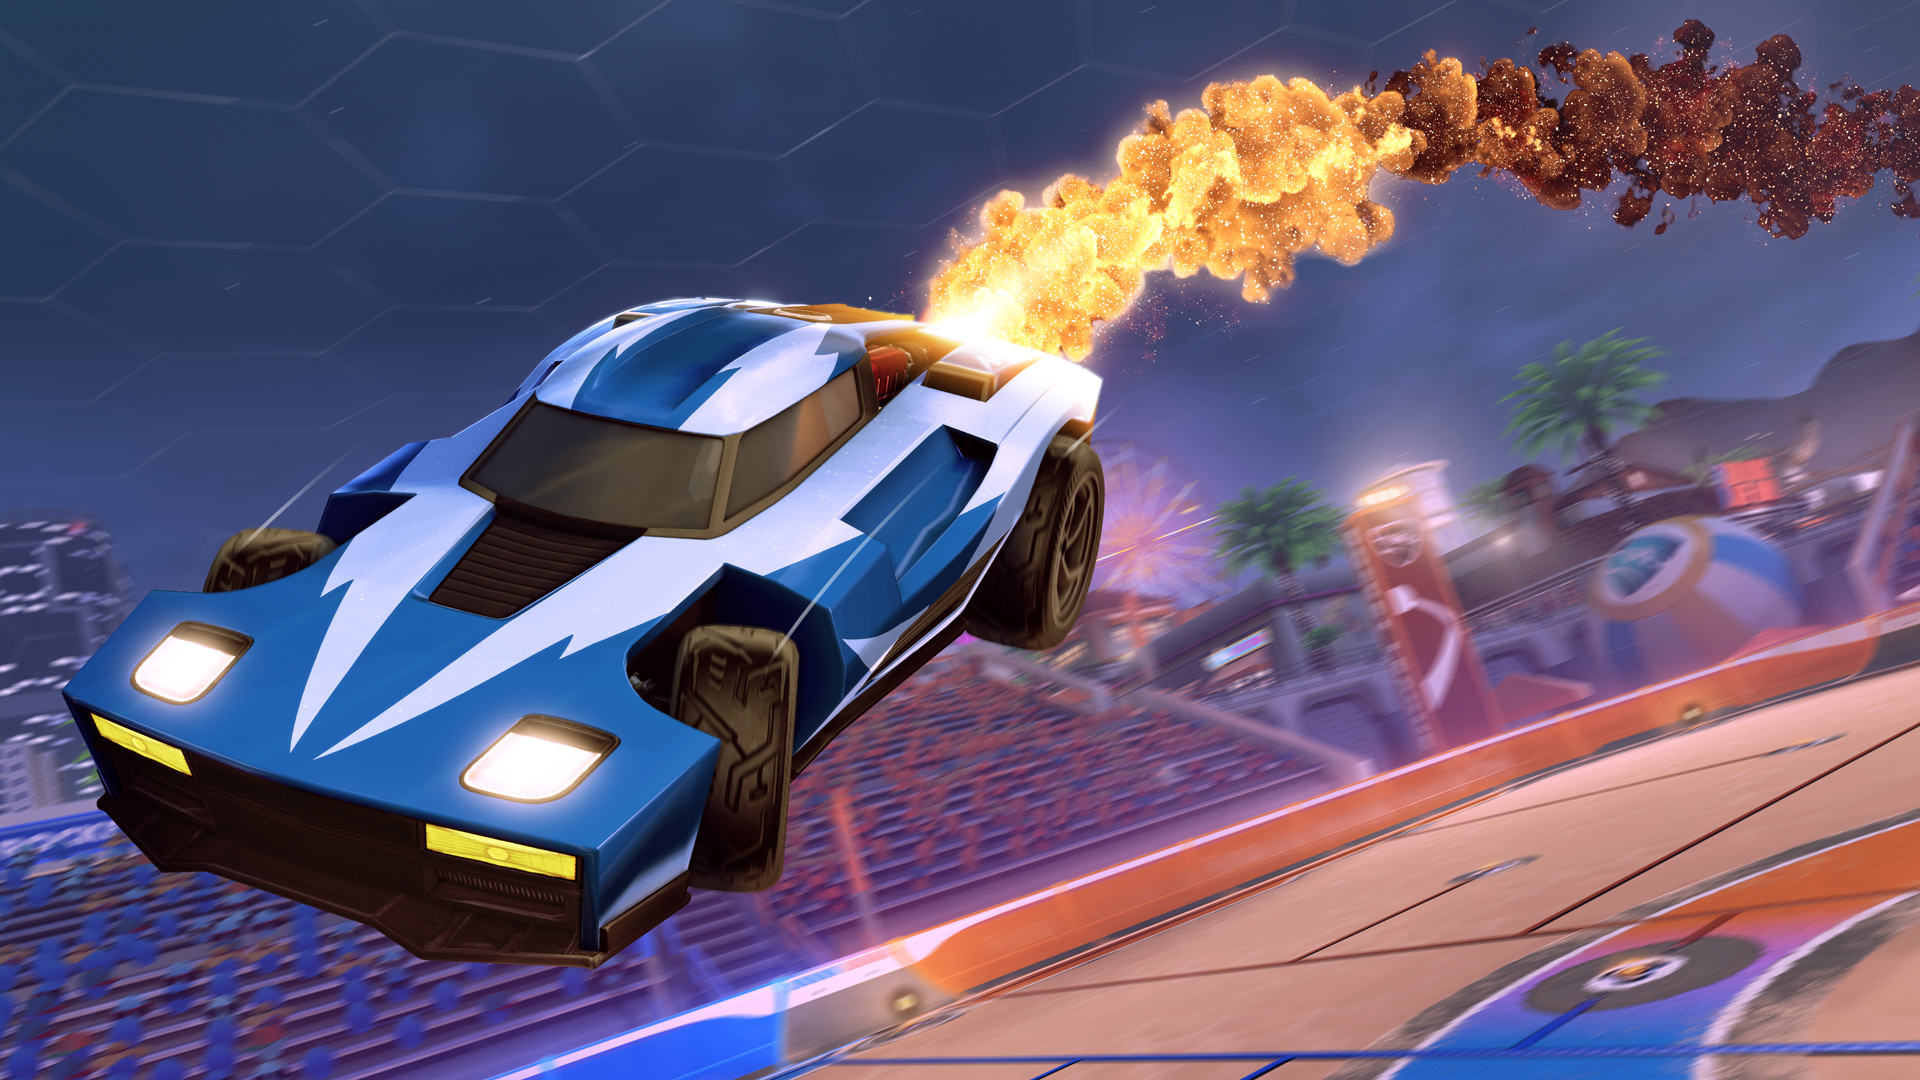 video games to play while stoned - Rocket League video game screenshot